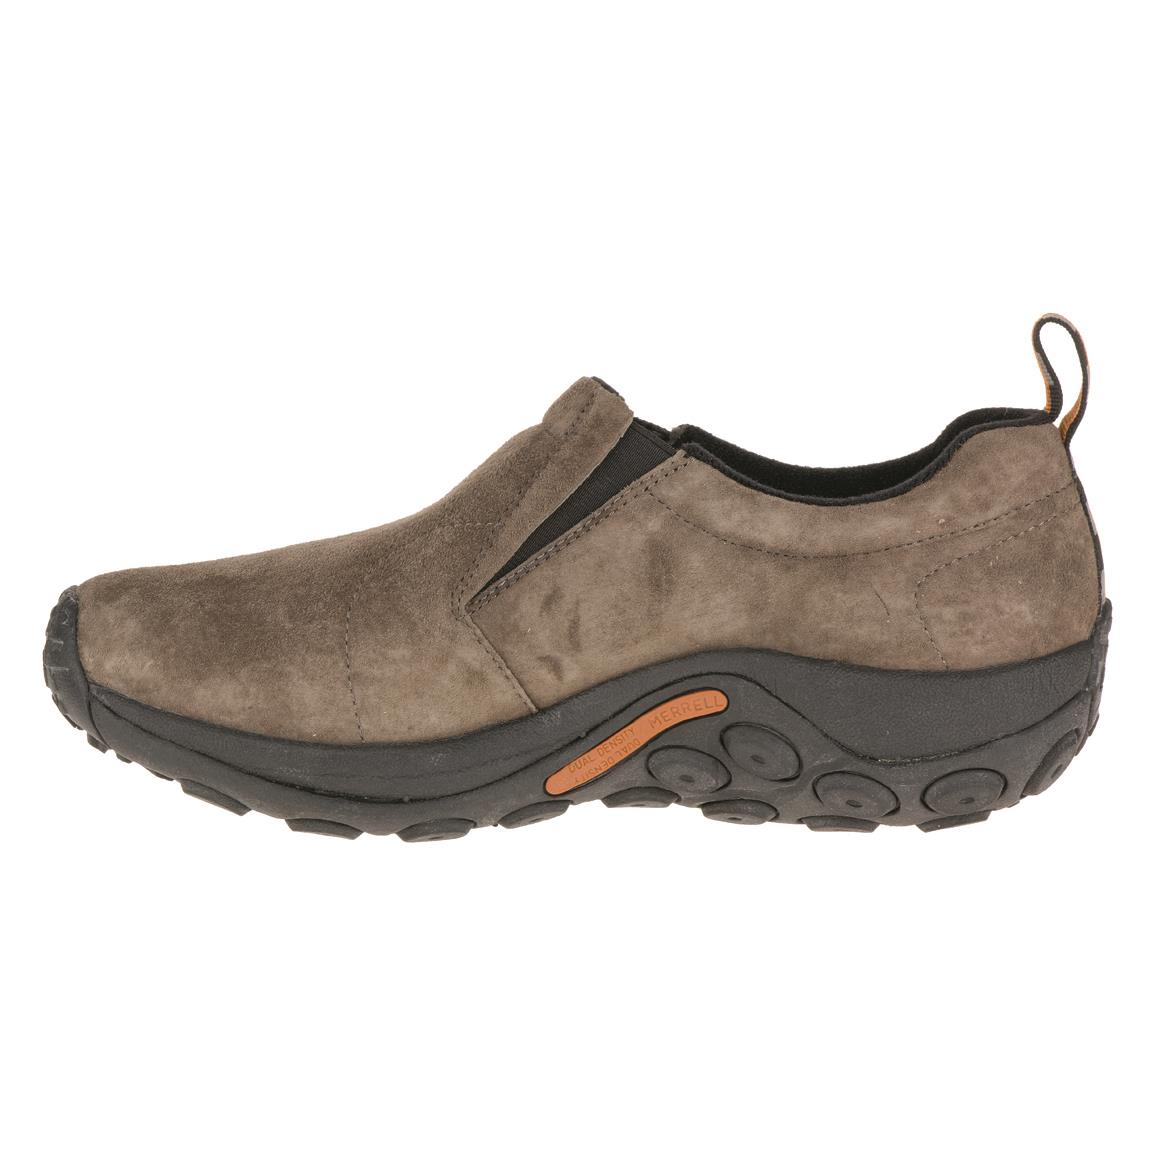 Black Leather Arch Support Shoes | Sportsman's Guide